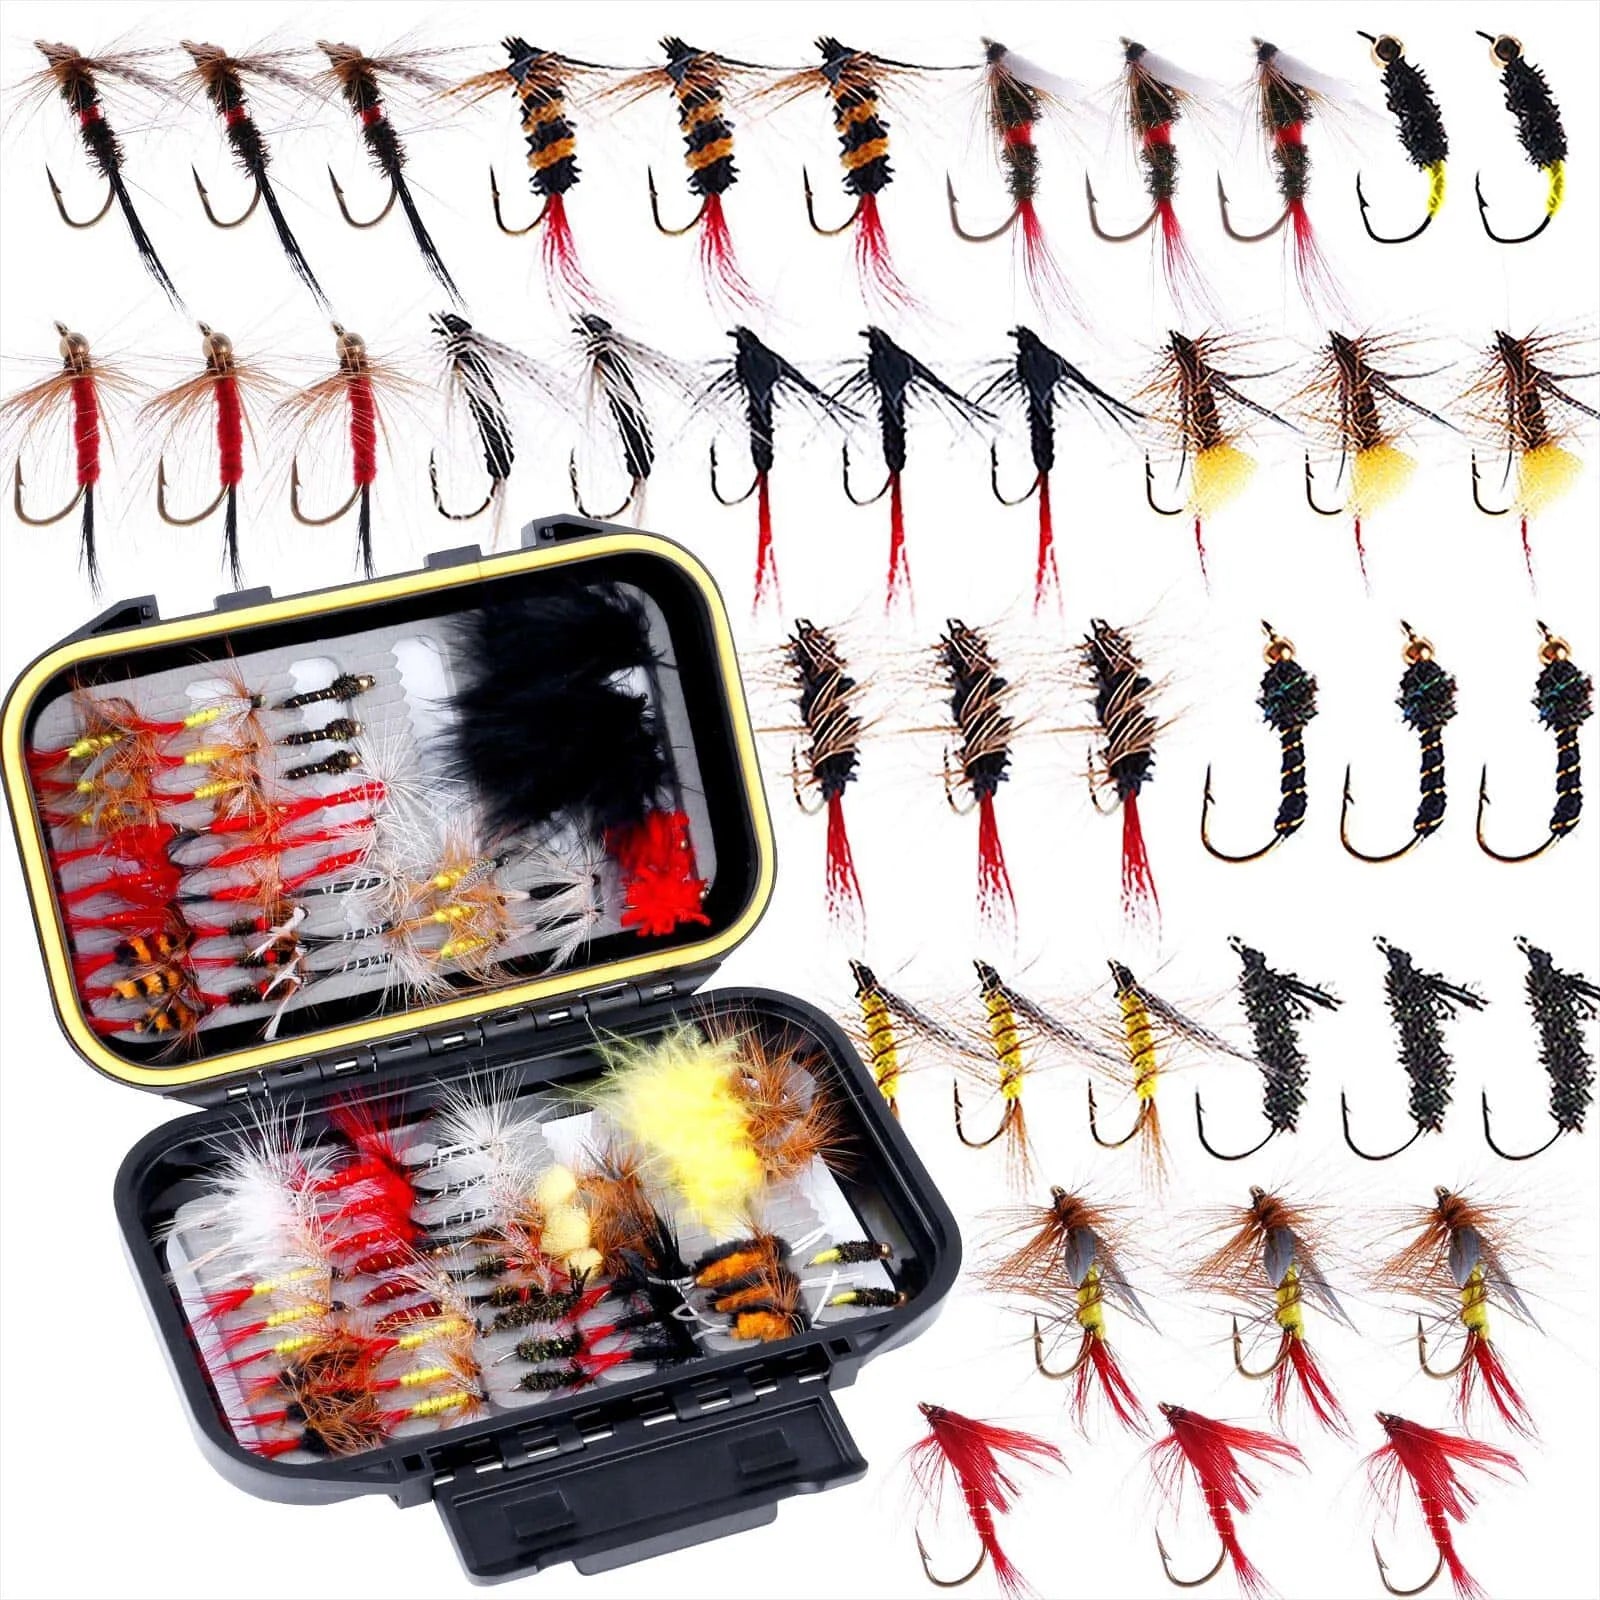 PLUSINNO Fishing Lures Baits Tackle including Crankbaits, Spinnerbaits, Plastic  worms, Jigs, Topwater Lures , Tackle Box and More Fishing Gear Lures Kit  Set, 22…